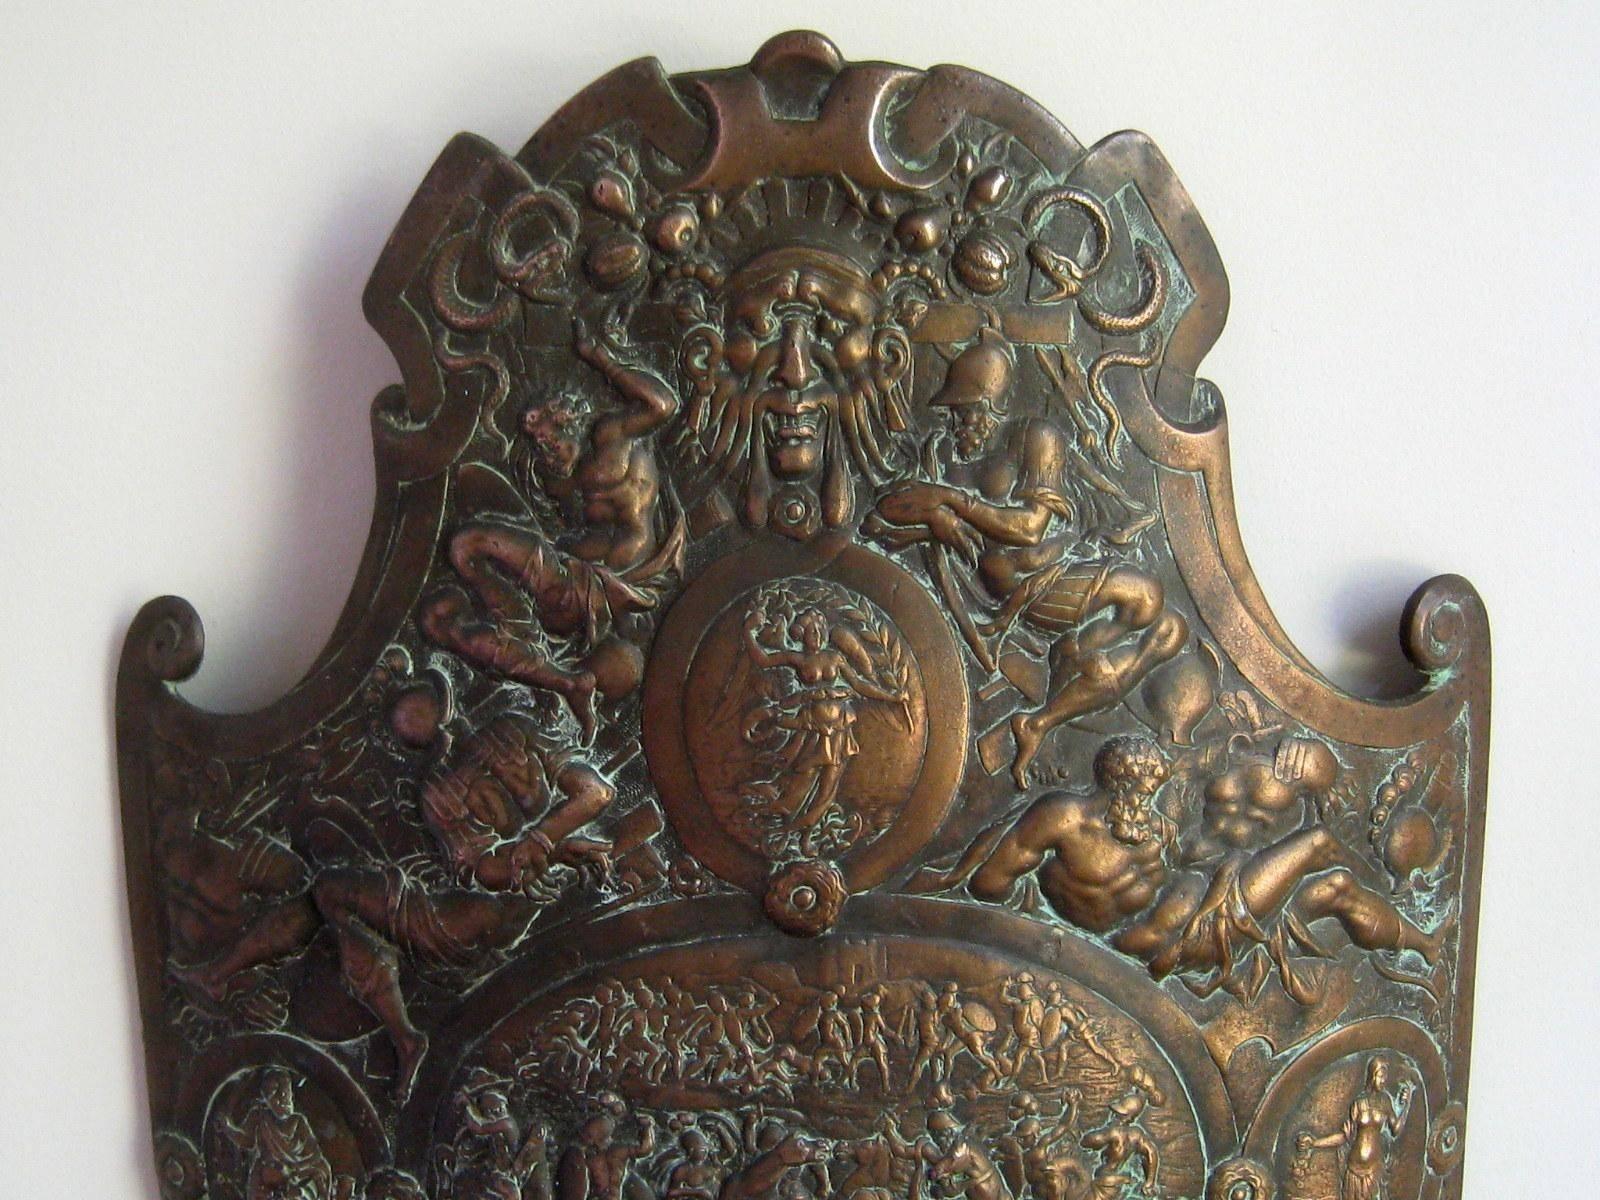 This beautifully detailed cast iron shield is decorated in Renaissance style. I have not identified the original, but I imagine this piece is a copy of a known parade shield. The finish is a glowing coppery bronze with darkened patina and verdigris.